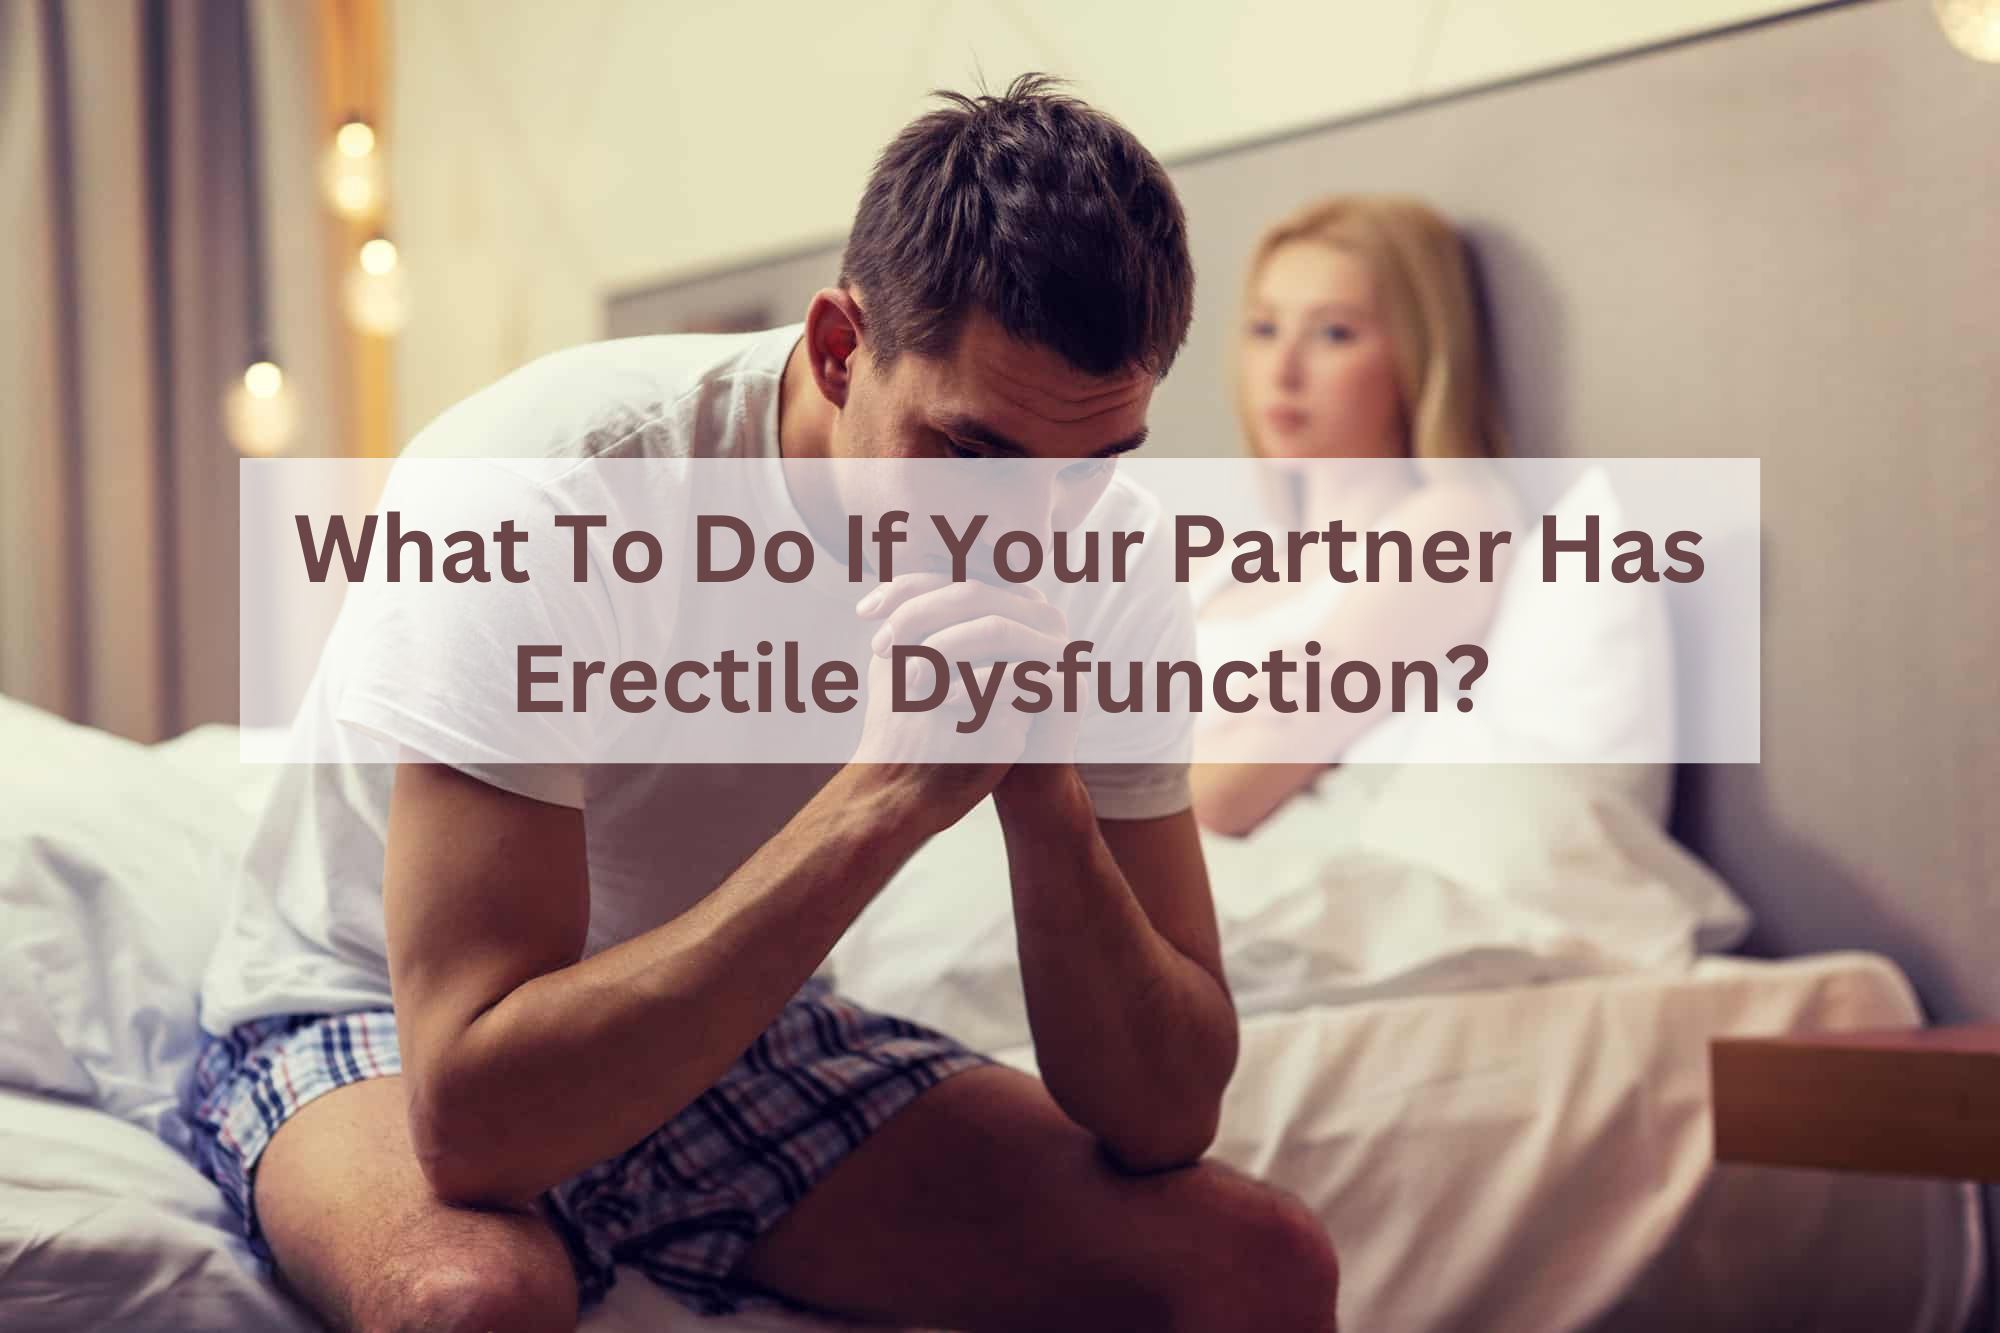 3 Things Your Partner Can Do To Help Men with Erectile Dysfunction